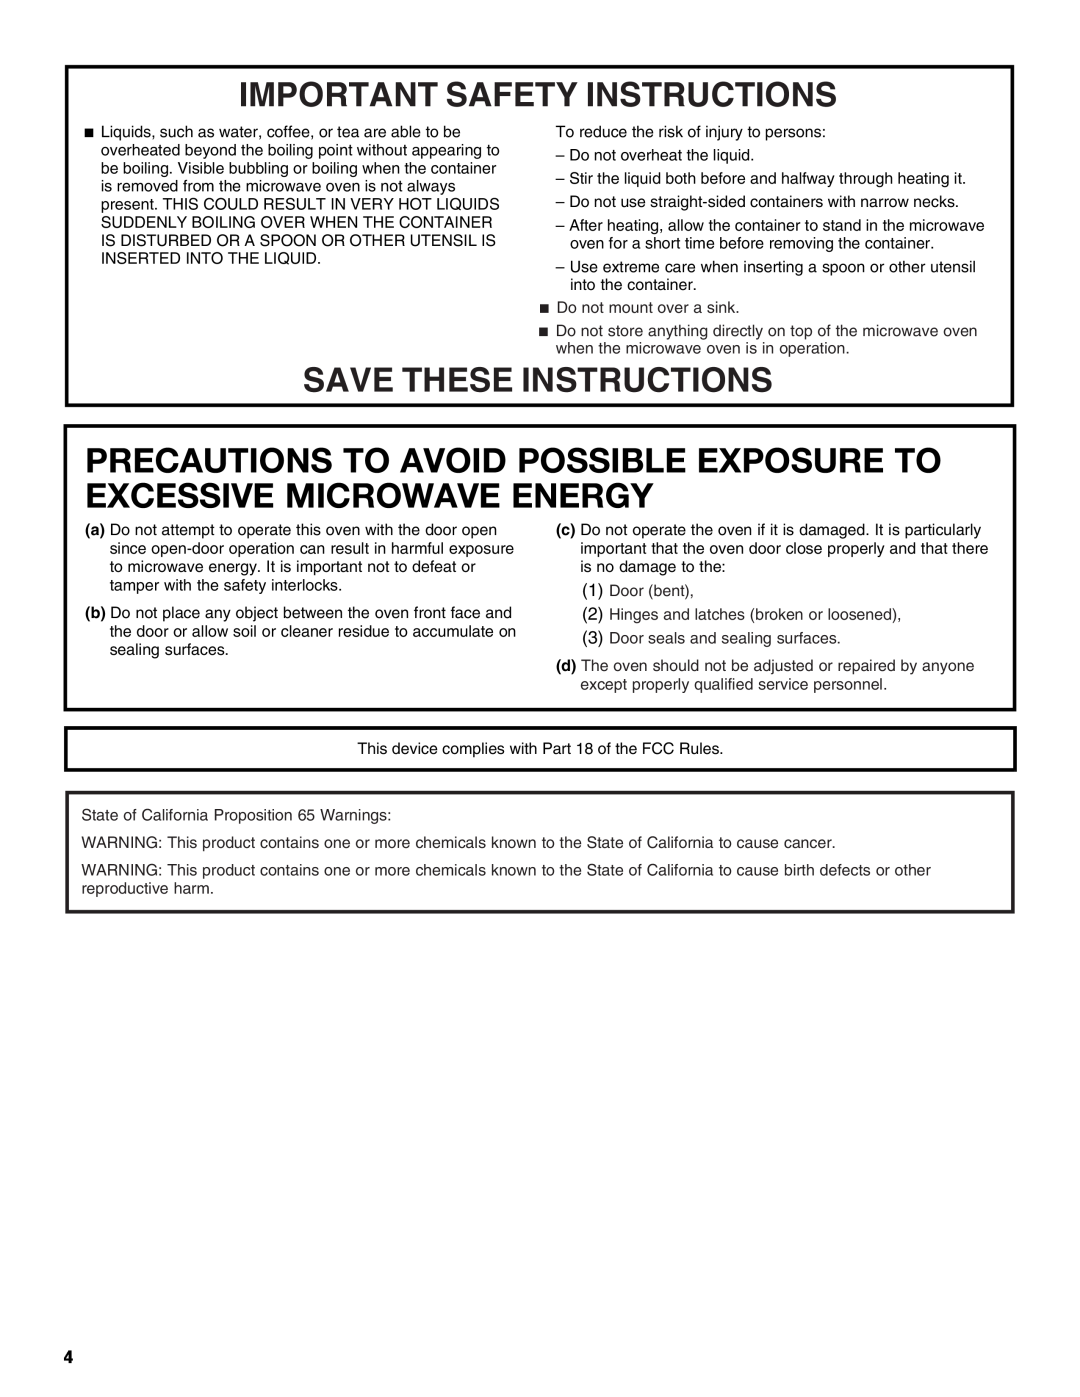 Whirlpool WMC50522 Precautions To Avoid Possible Exposure To Excessive Microwave Energy, Important Safety Instructions 